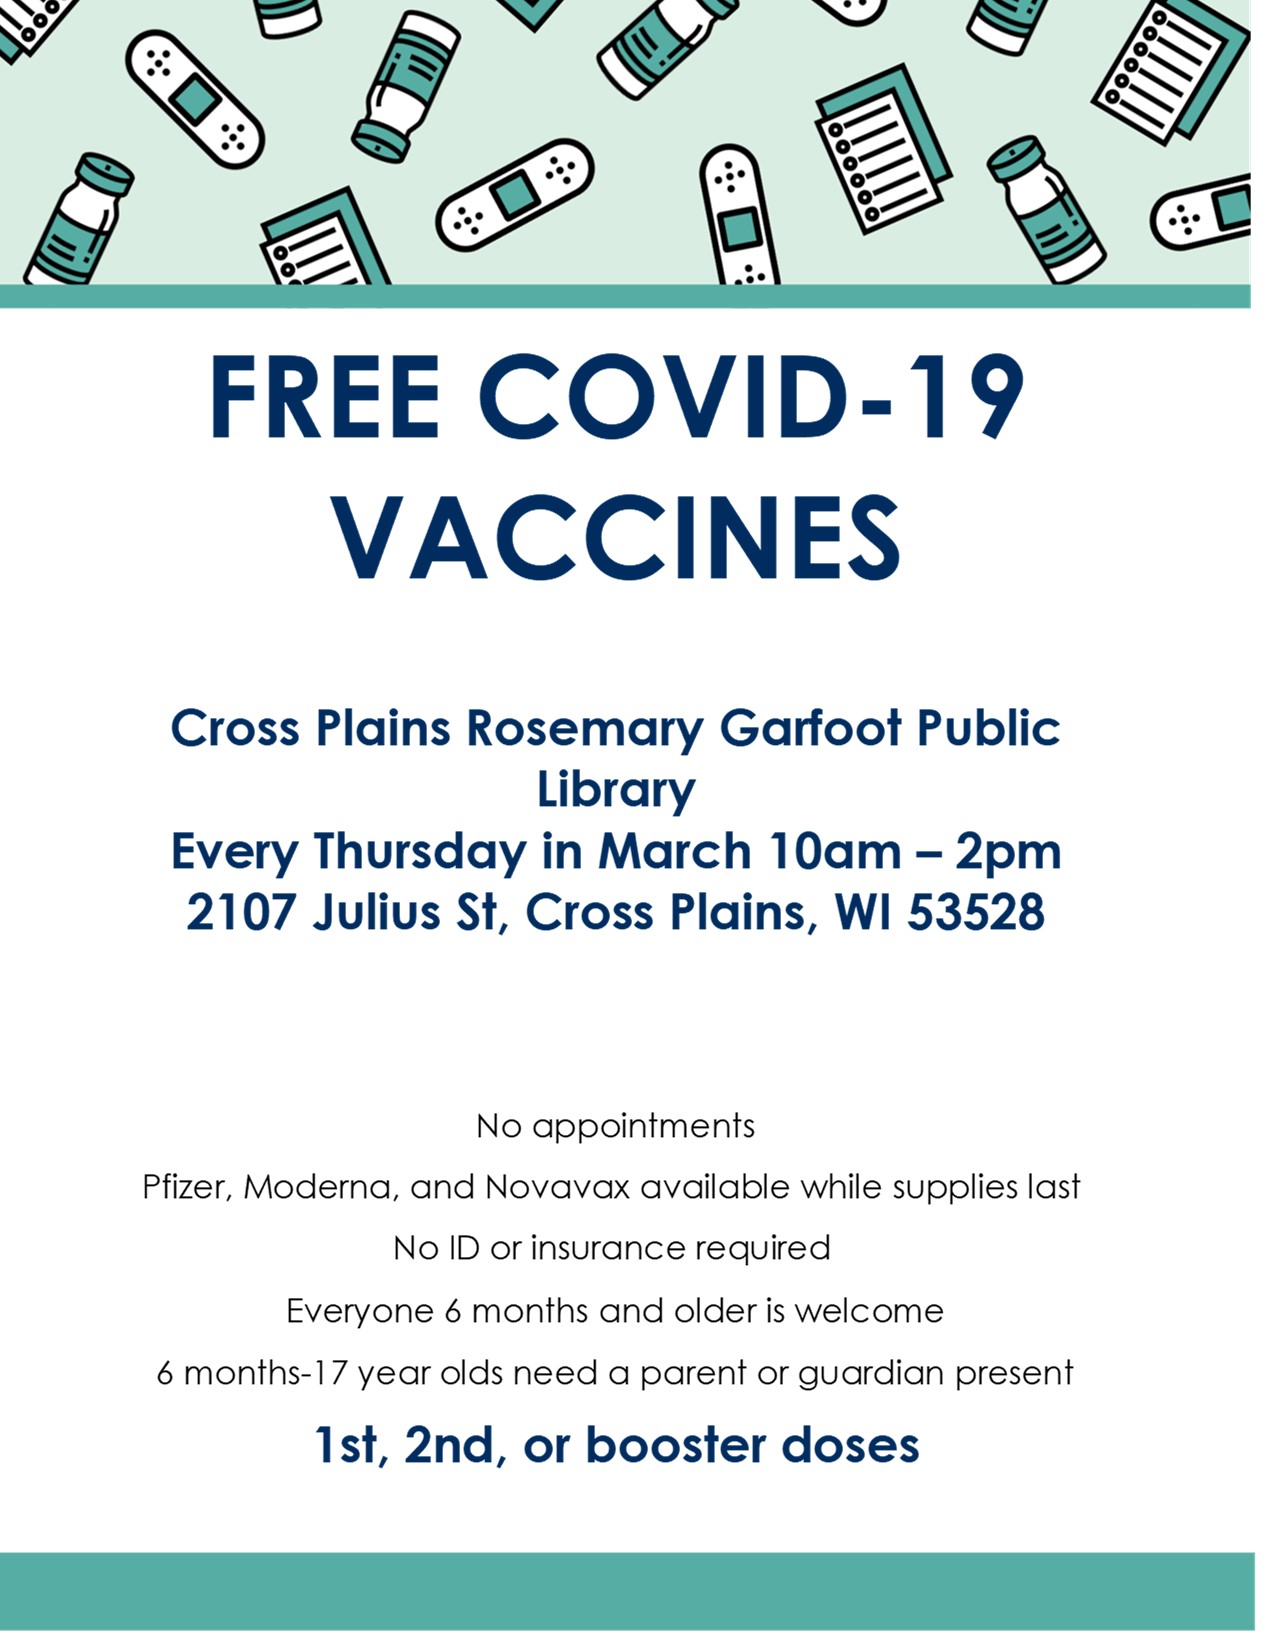 Flier announcing free COVID vaccines at the library.  White background with blue and mint greet words with illustrated images of test kits at the top of the flier.